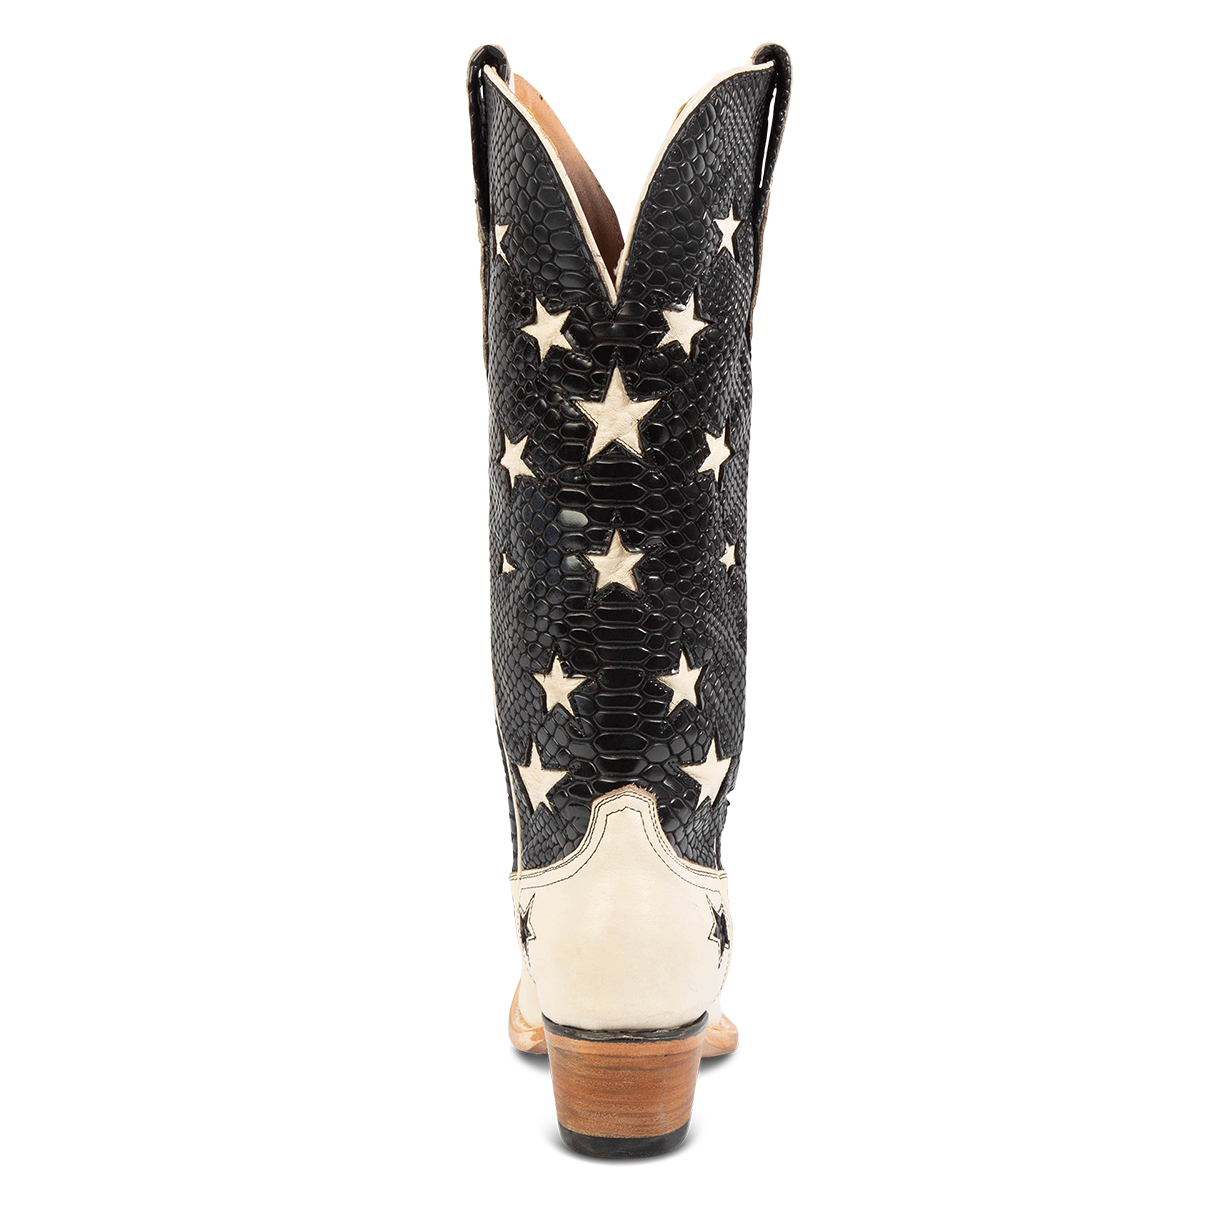 Back view showing star inlay detailing and low heel on FREEBIRD women's Starzz black western boot